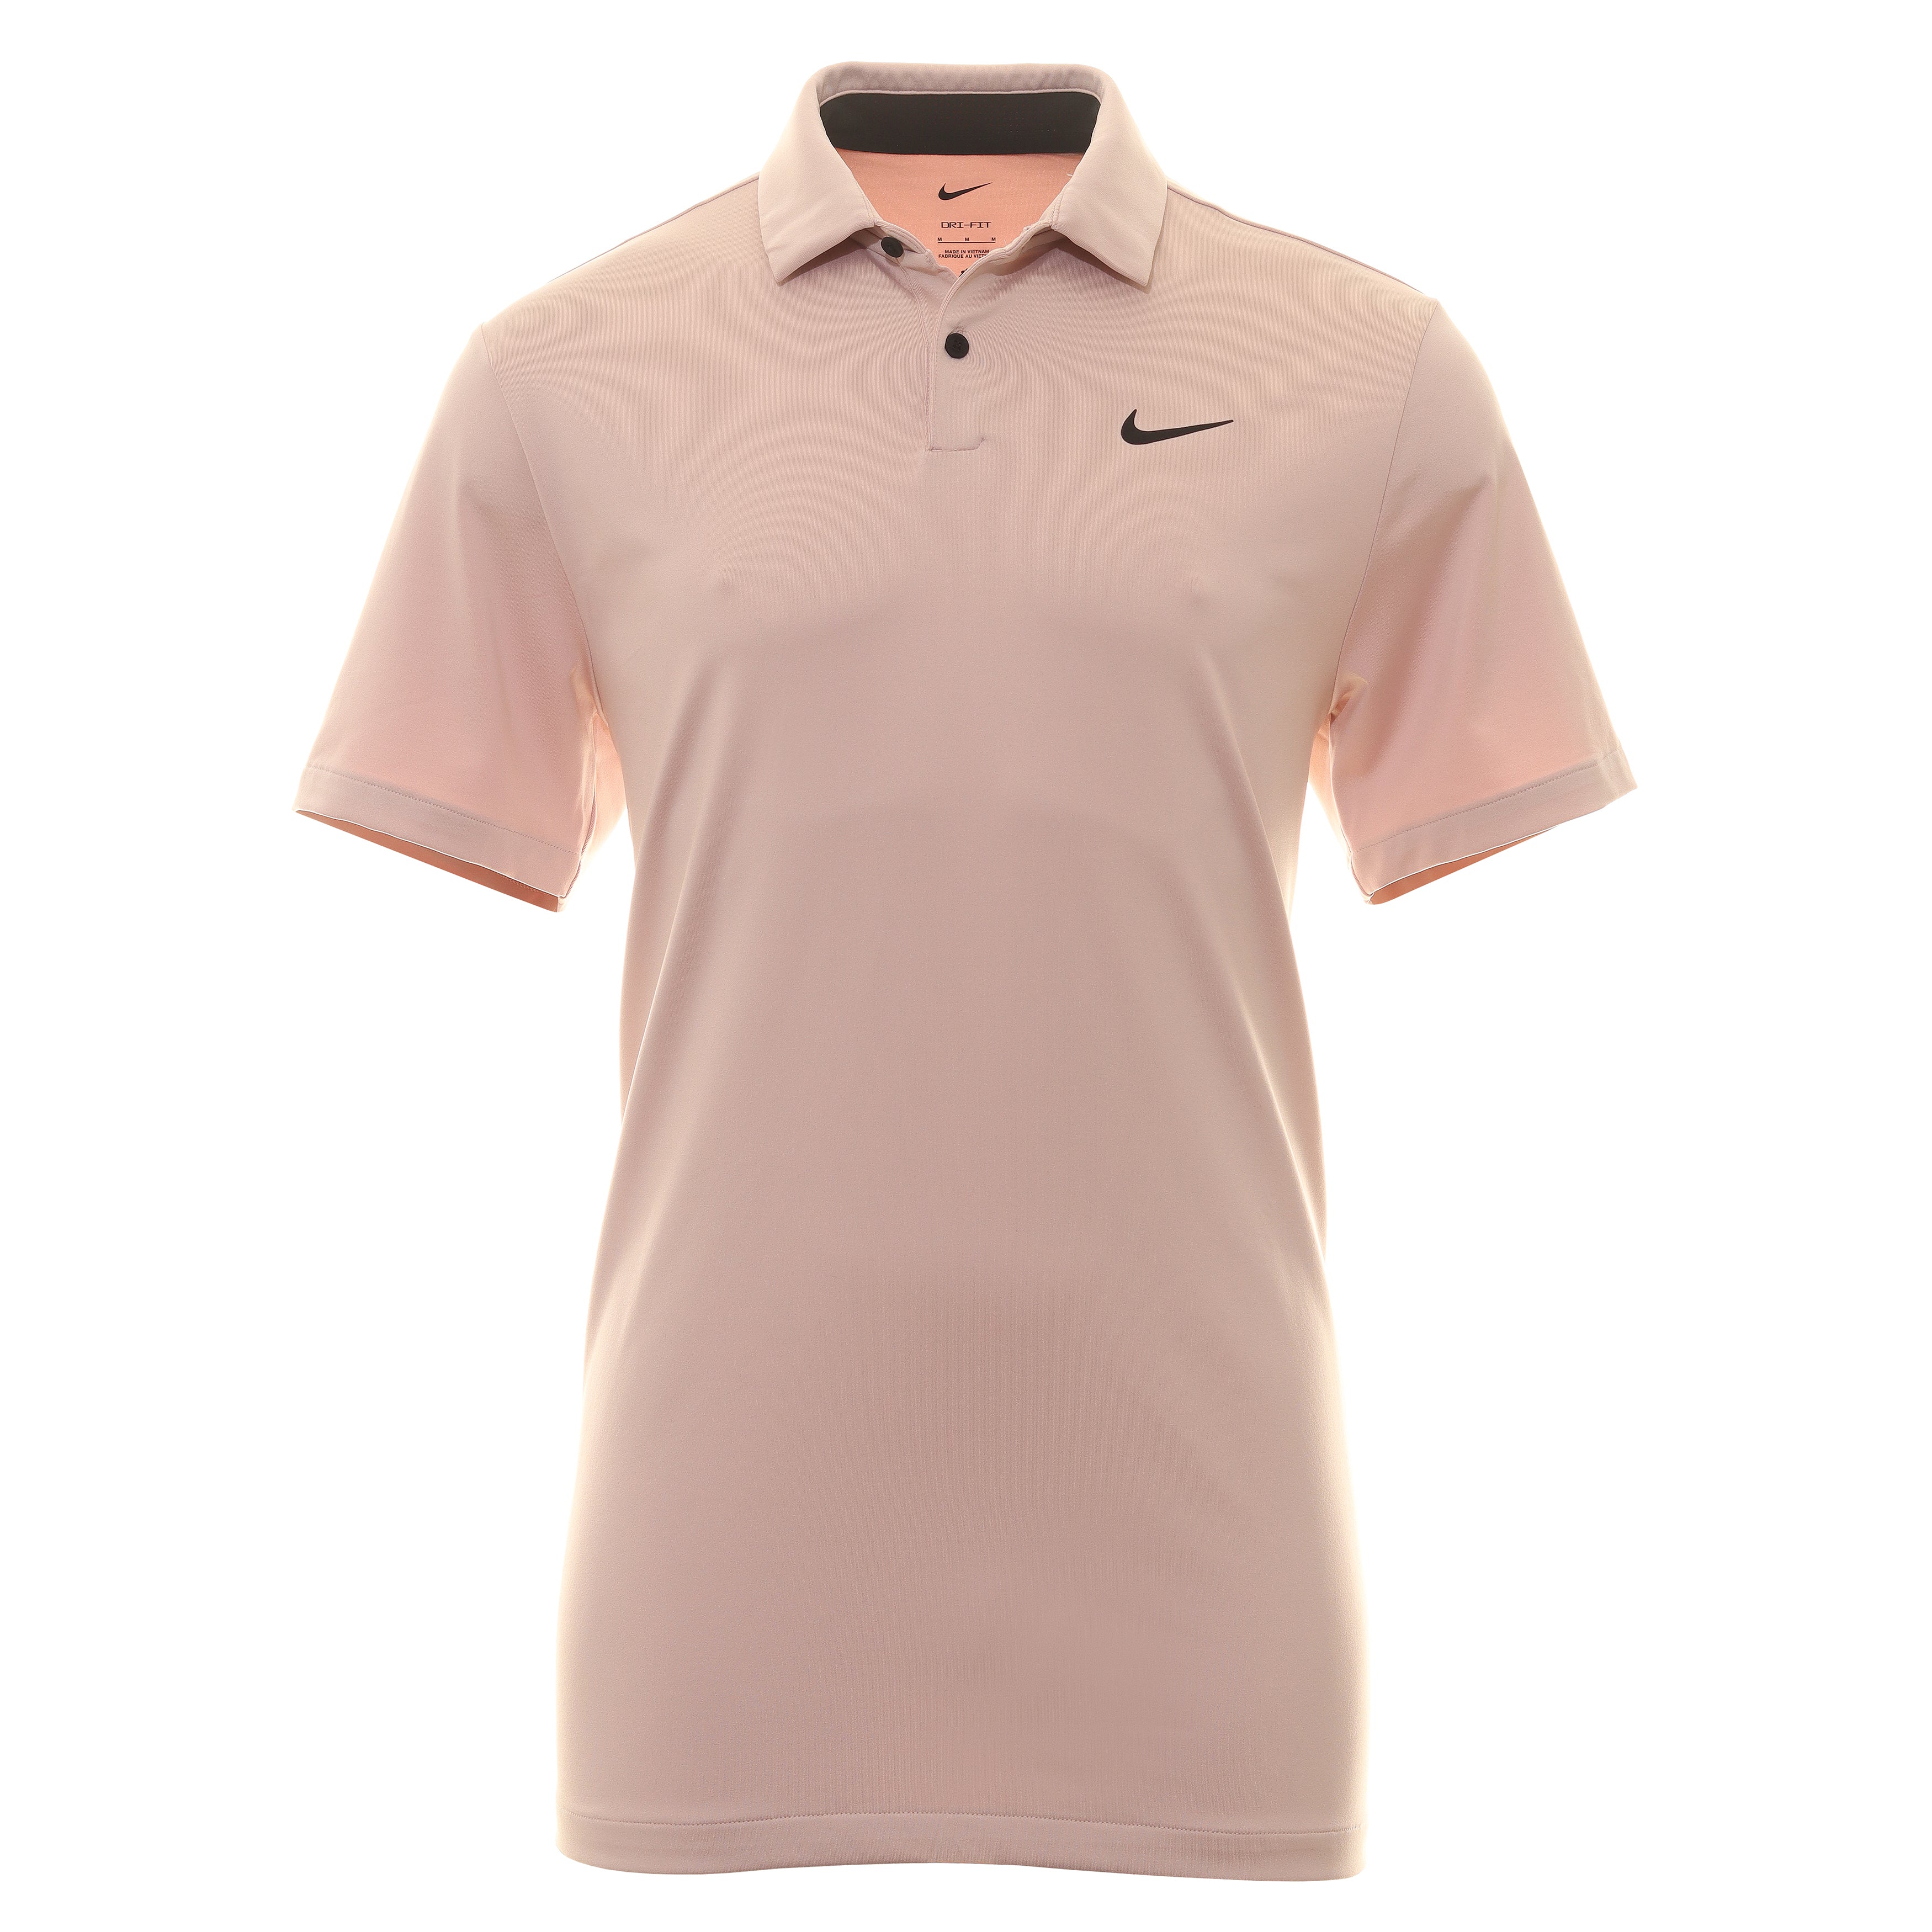 Nike Golf Dri-Fit Tour Solid Shirt DR5298 Pink Oxford 601 | Function18 ...